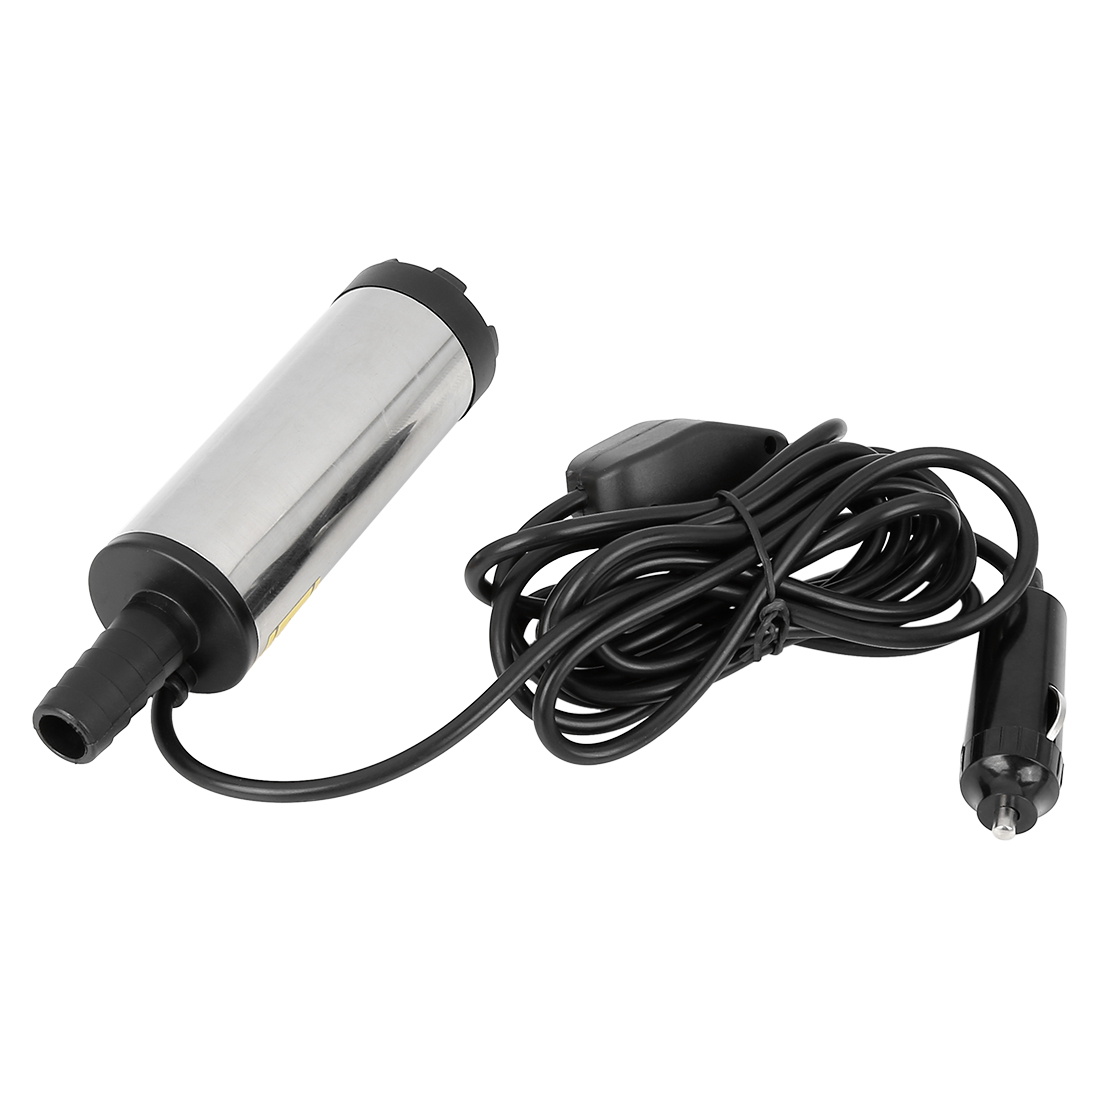 30L/min 12V/24V 38mm 51mm DC Electric Submersible Pump Stainless Steel Oil Pump Water Oil Diesel Fuel Transfer Refueling Tool